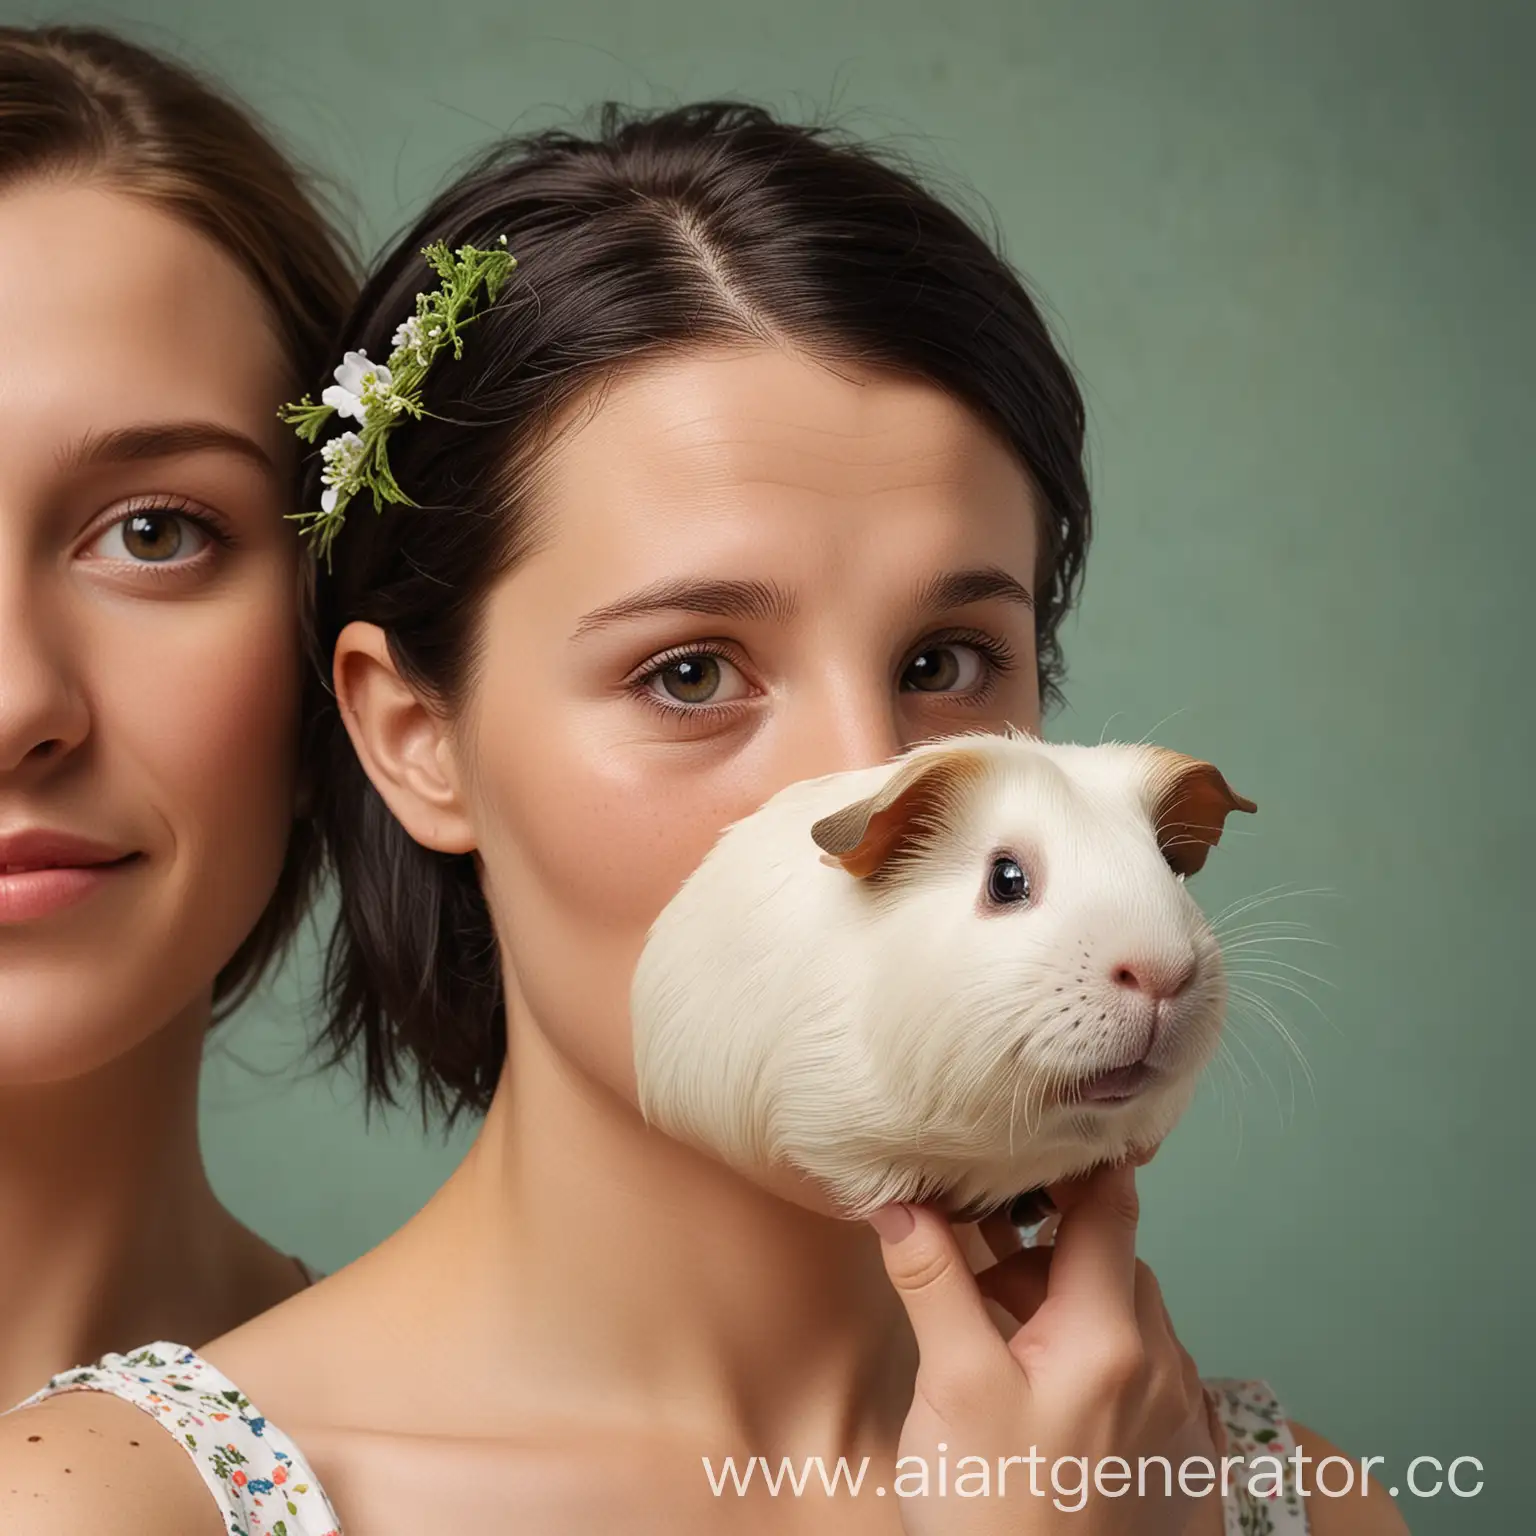 Sonya-Guinea-Pig-Portrait-of-a-Woman-with-Animal-Features